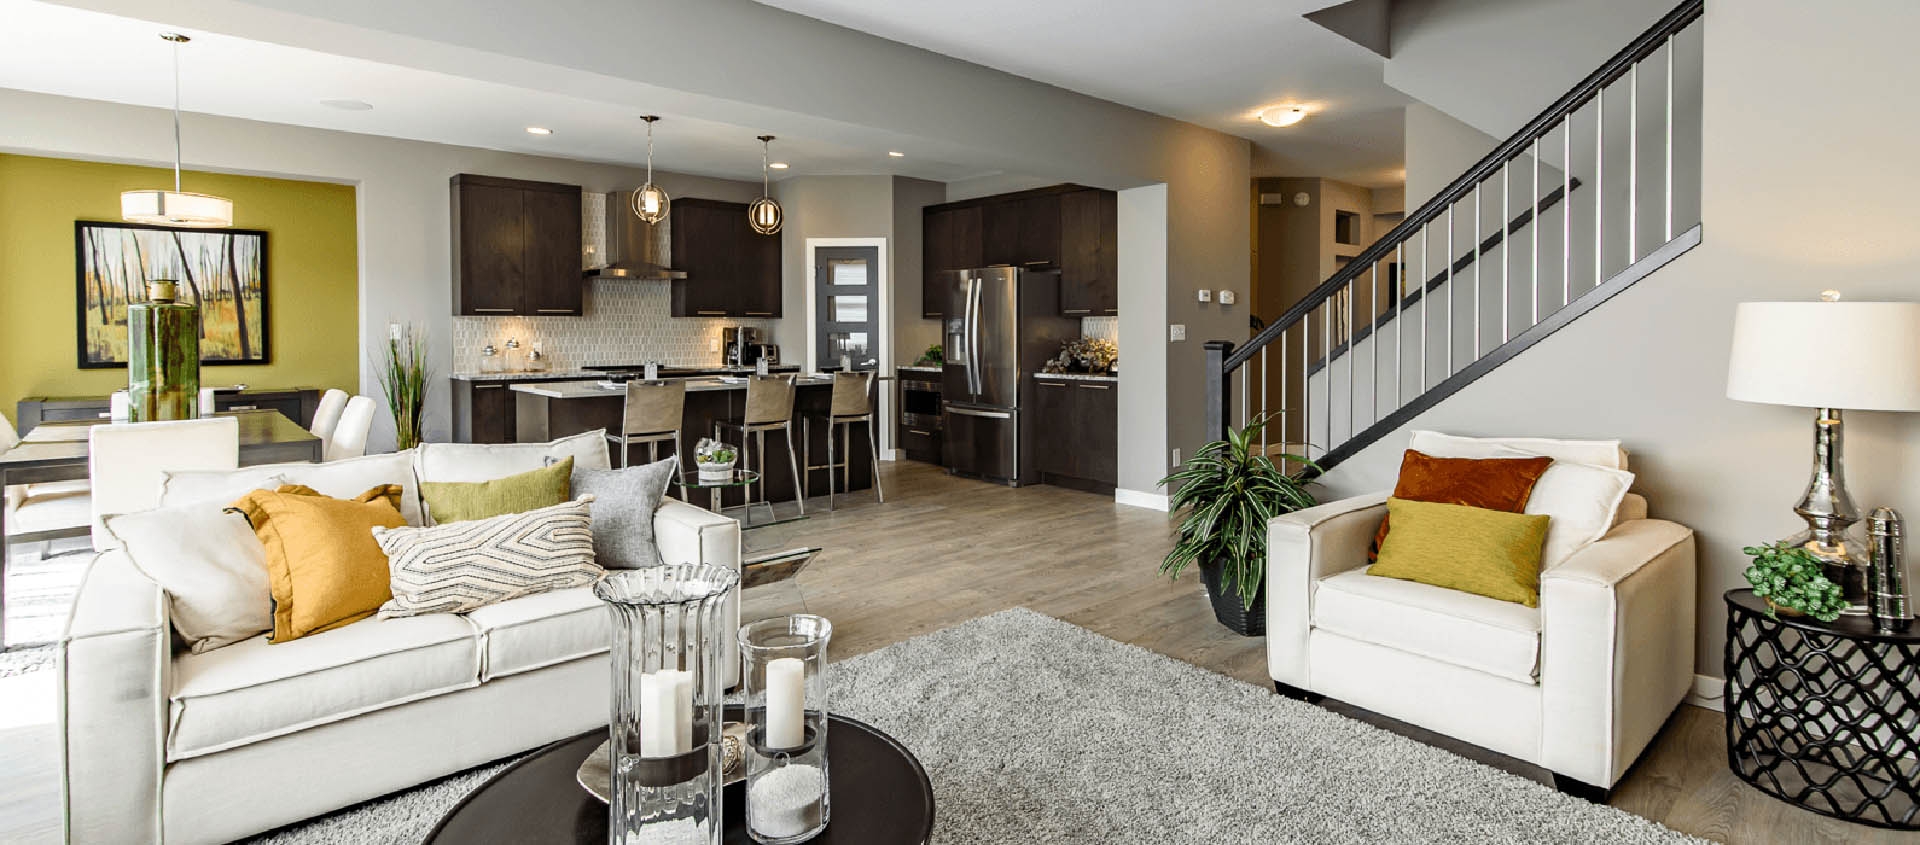 How to Find the Right Floor Plan as a First-Time Home Buyer Featured Image